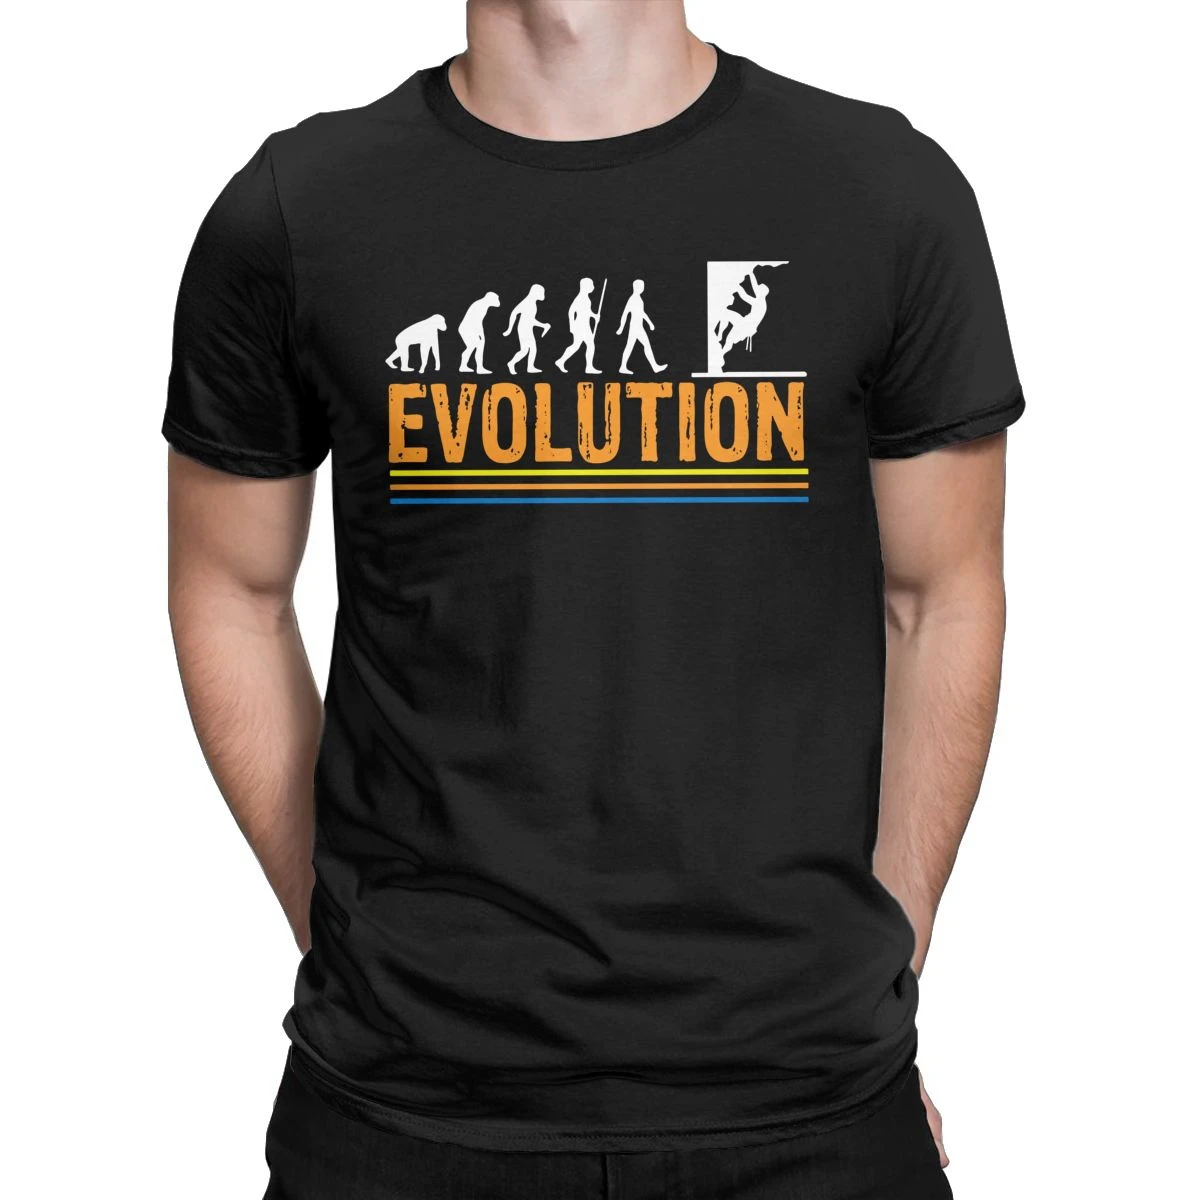 

Humor Evolution Of Rock Climbing T-Shirts for Men Round Neck Pure Cotton T Shirts Climber Climb Short Sleeve Tees Gift Idea Tops